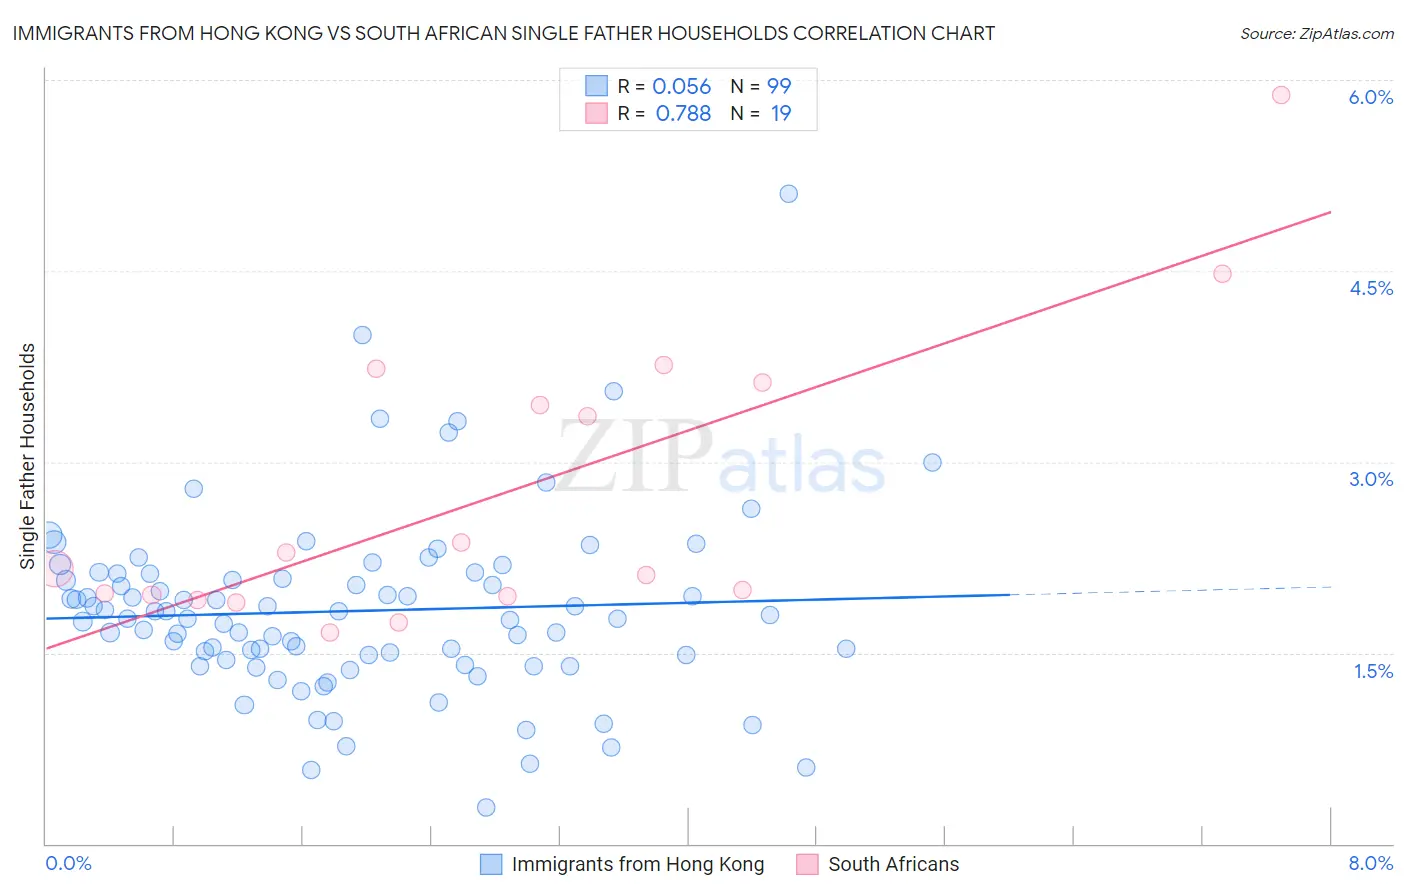 Immigrants from Hong Kong vs South African Single Father Households